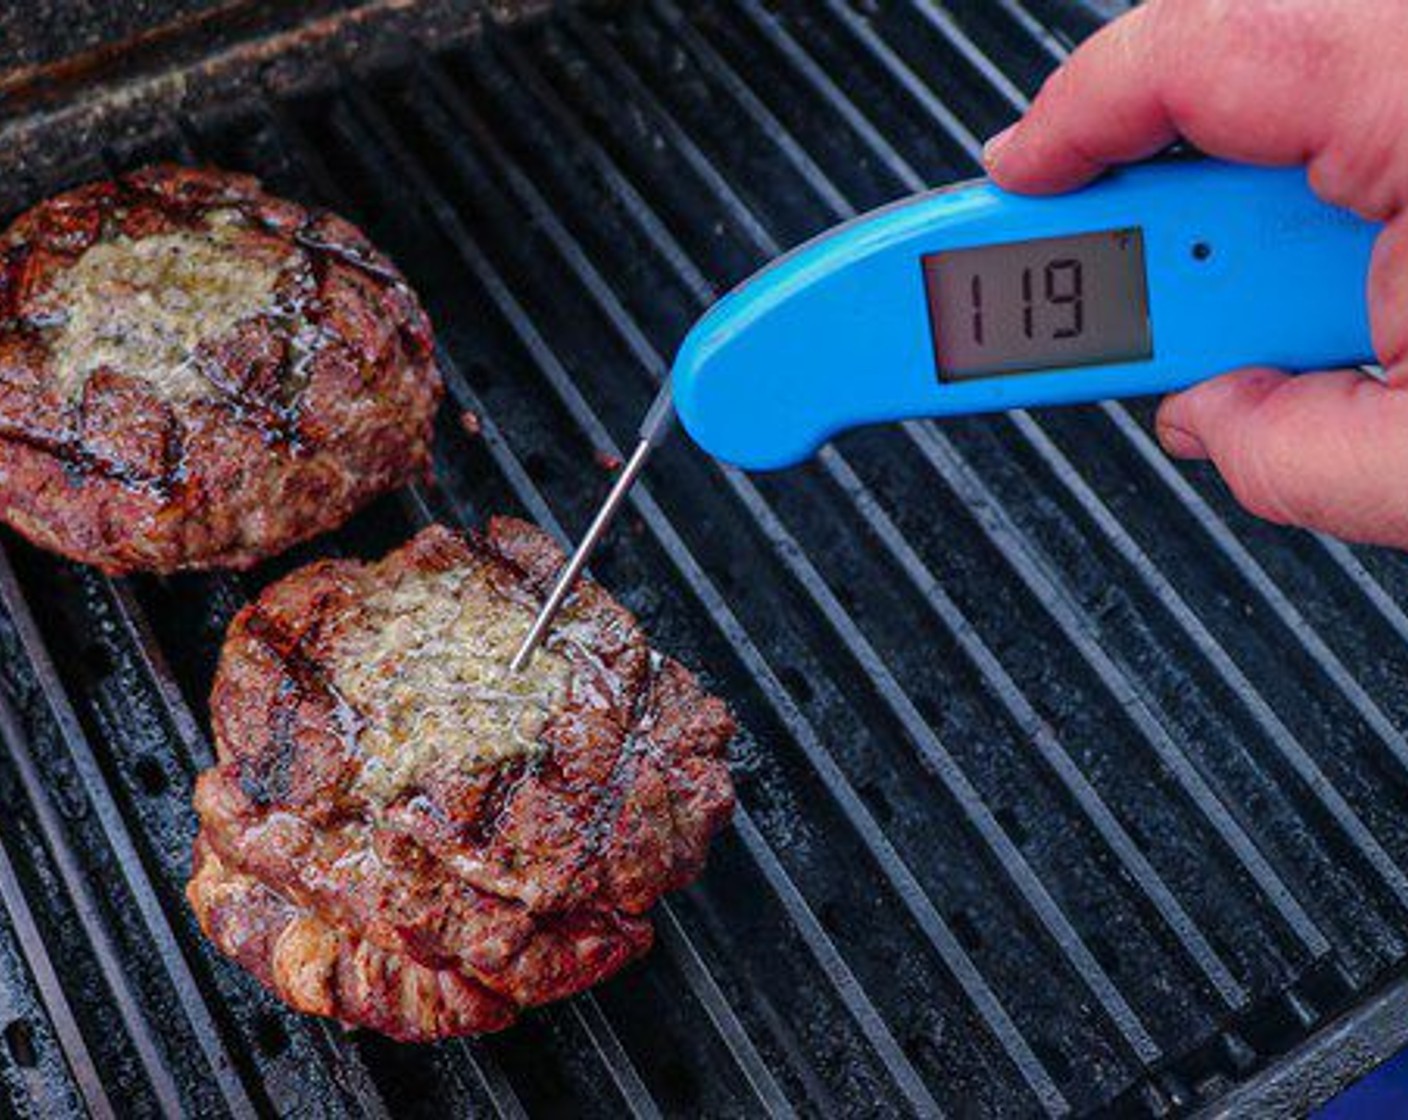 step 6 Continue to cook steaks until internal temperature reaches 125 degrees F (50 degrees C) on an instant-read thermometer.